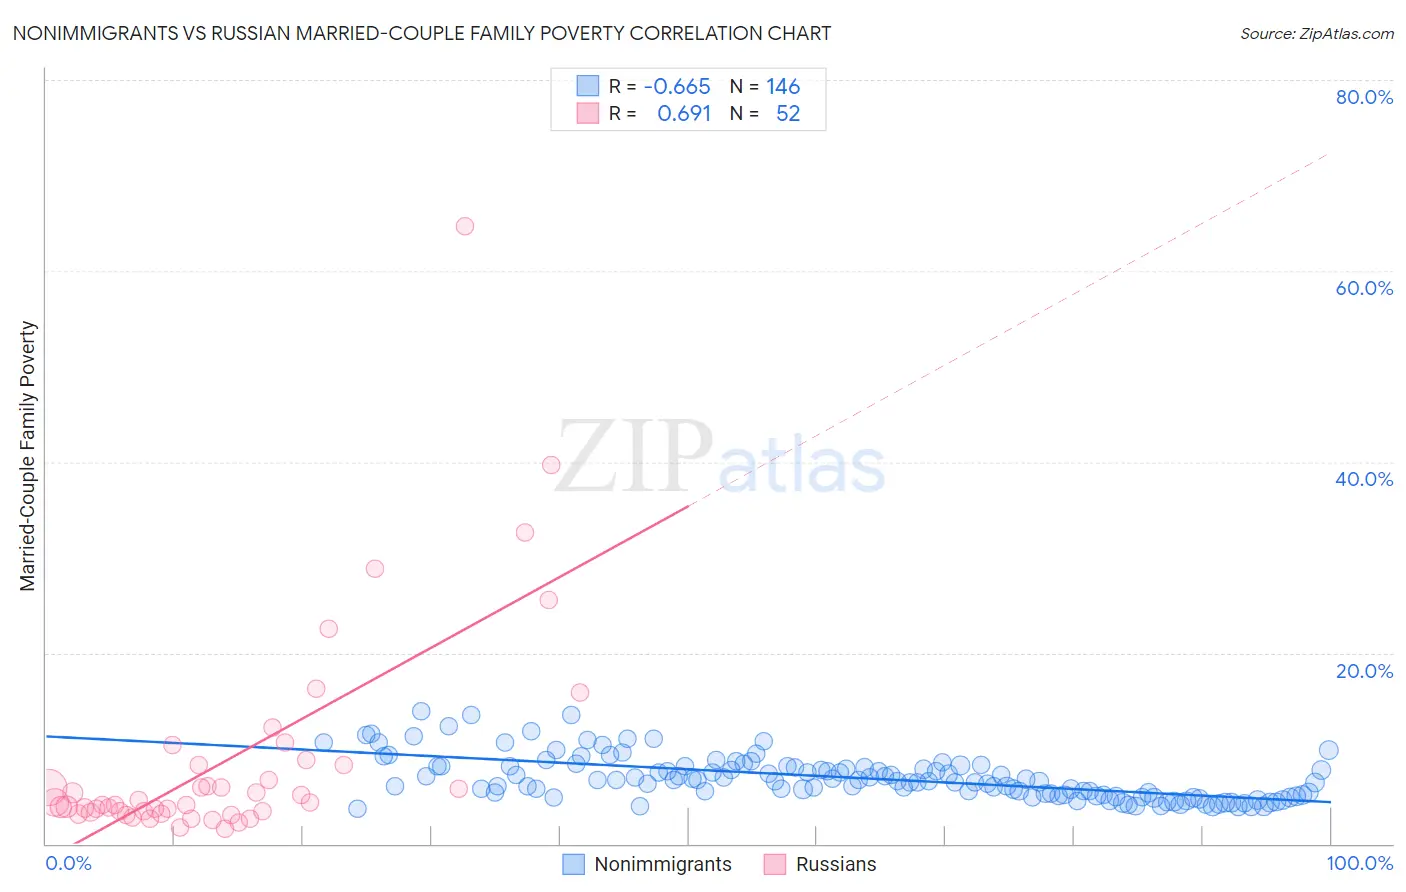 Nonimmigrants vs Russian Married-Couple Family Poverty